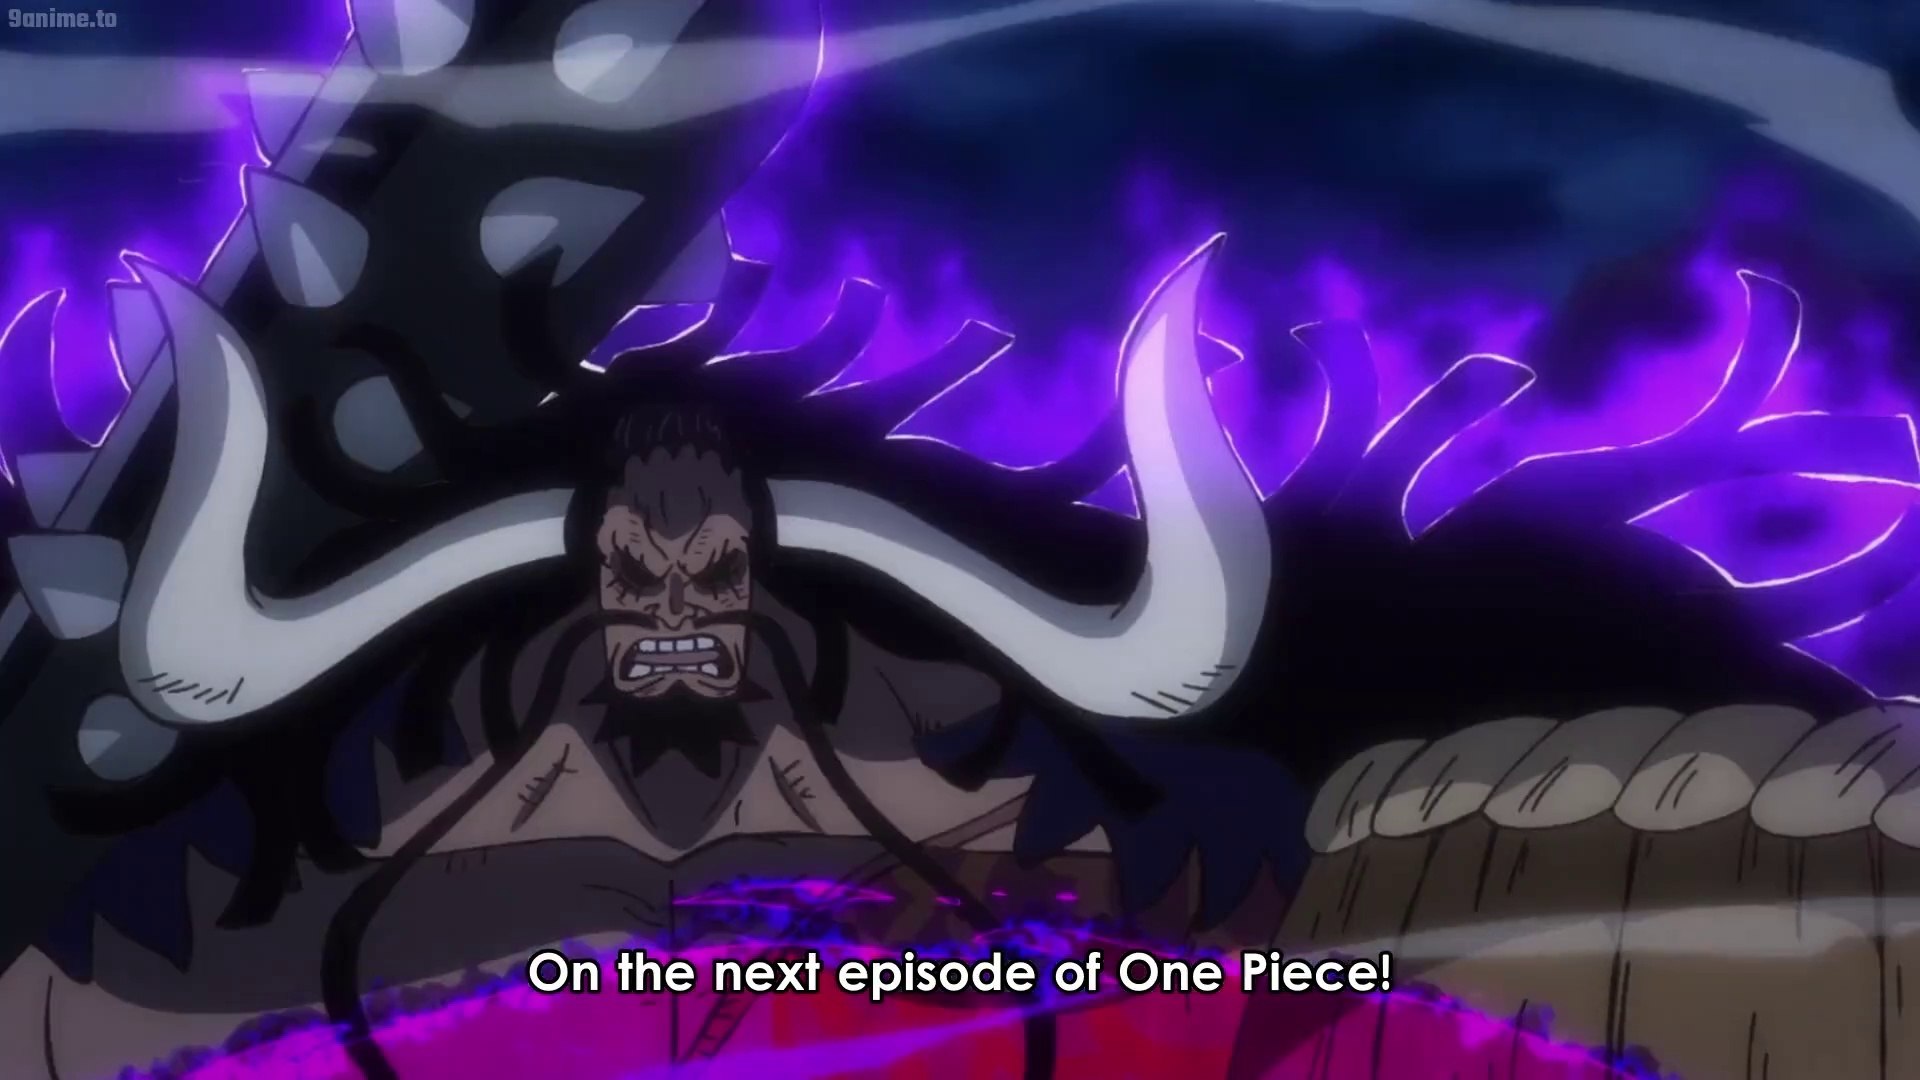 One Piece at 9anime